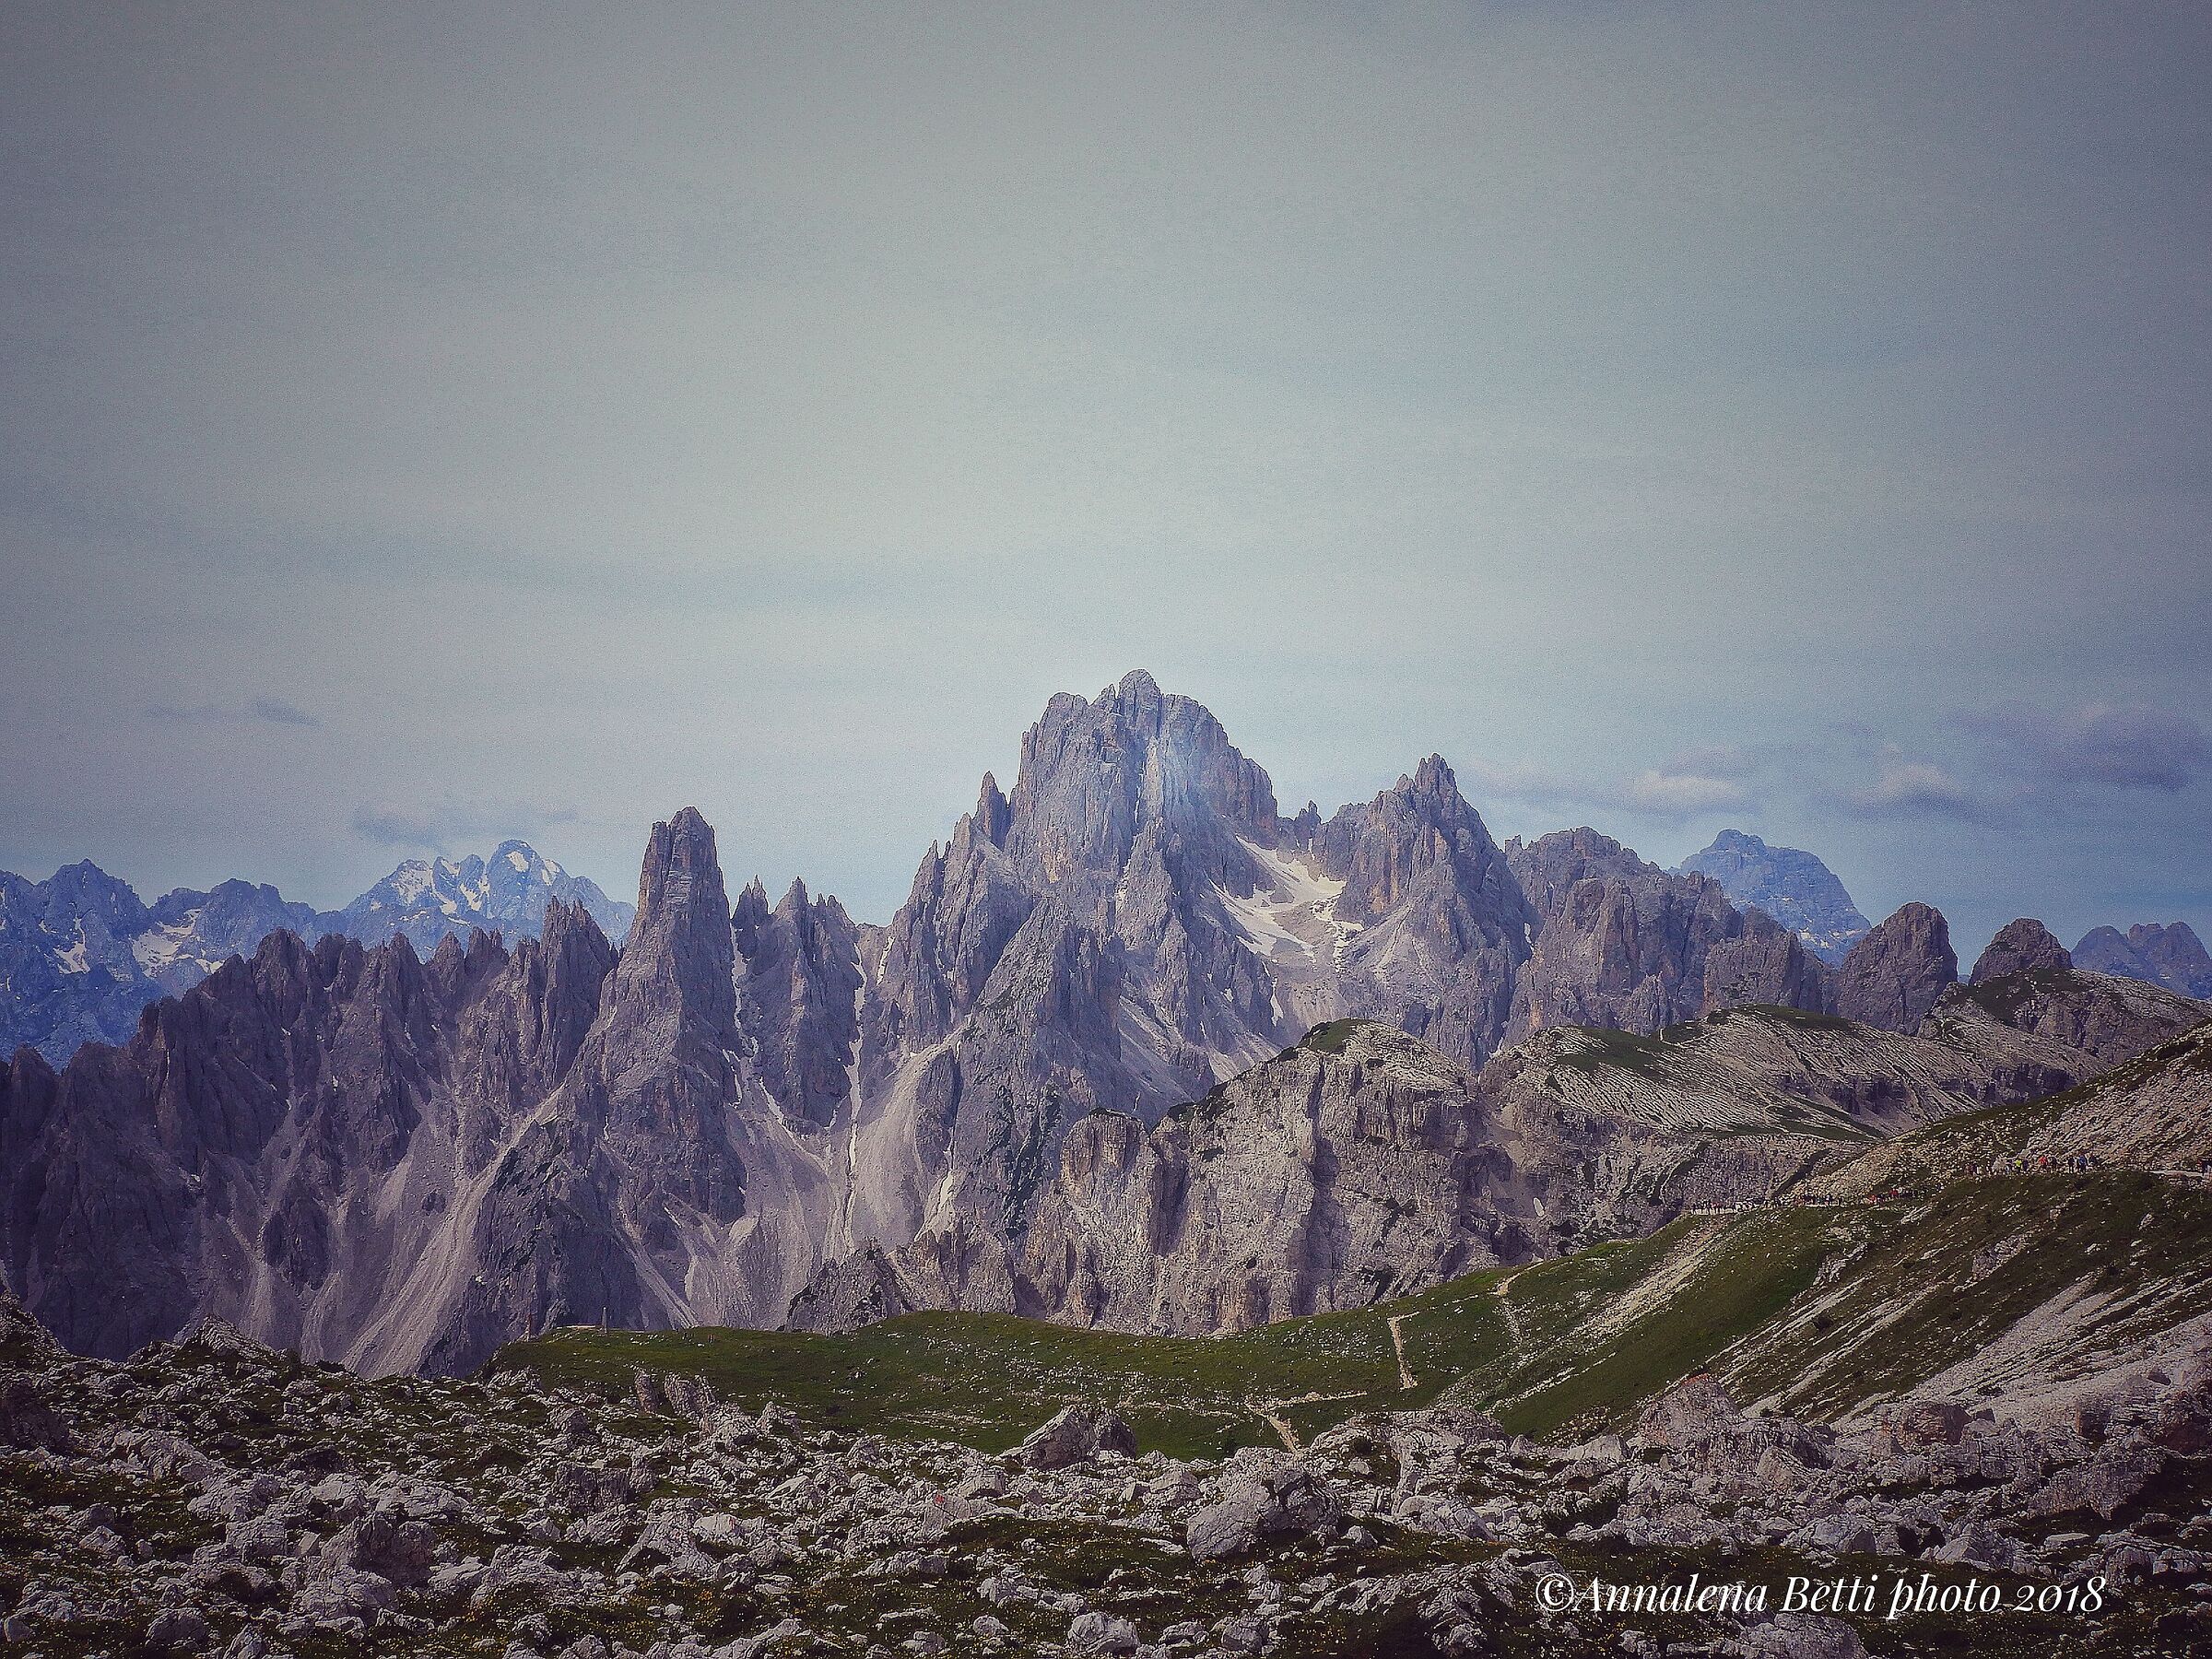 The Cadini Mountains group in the Dolomites ...